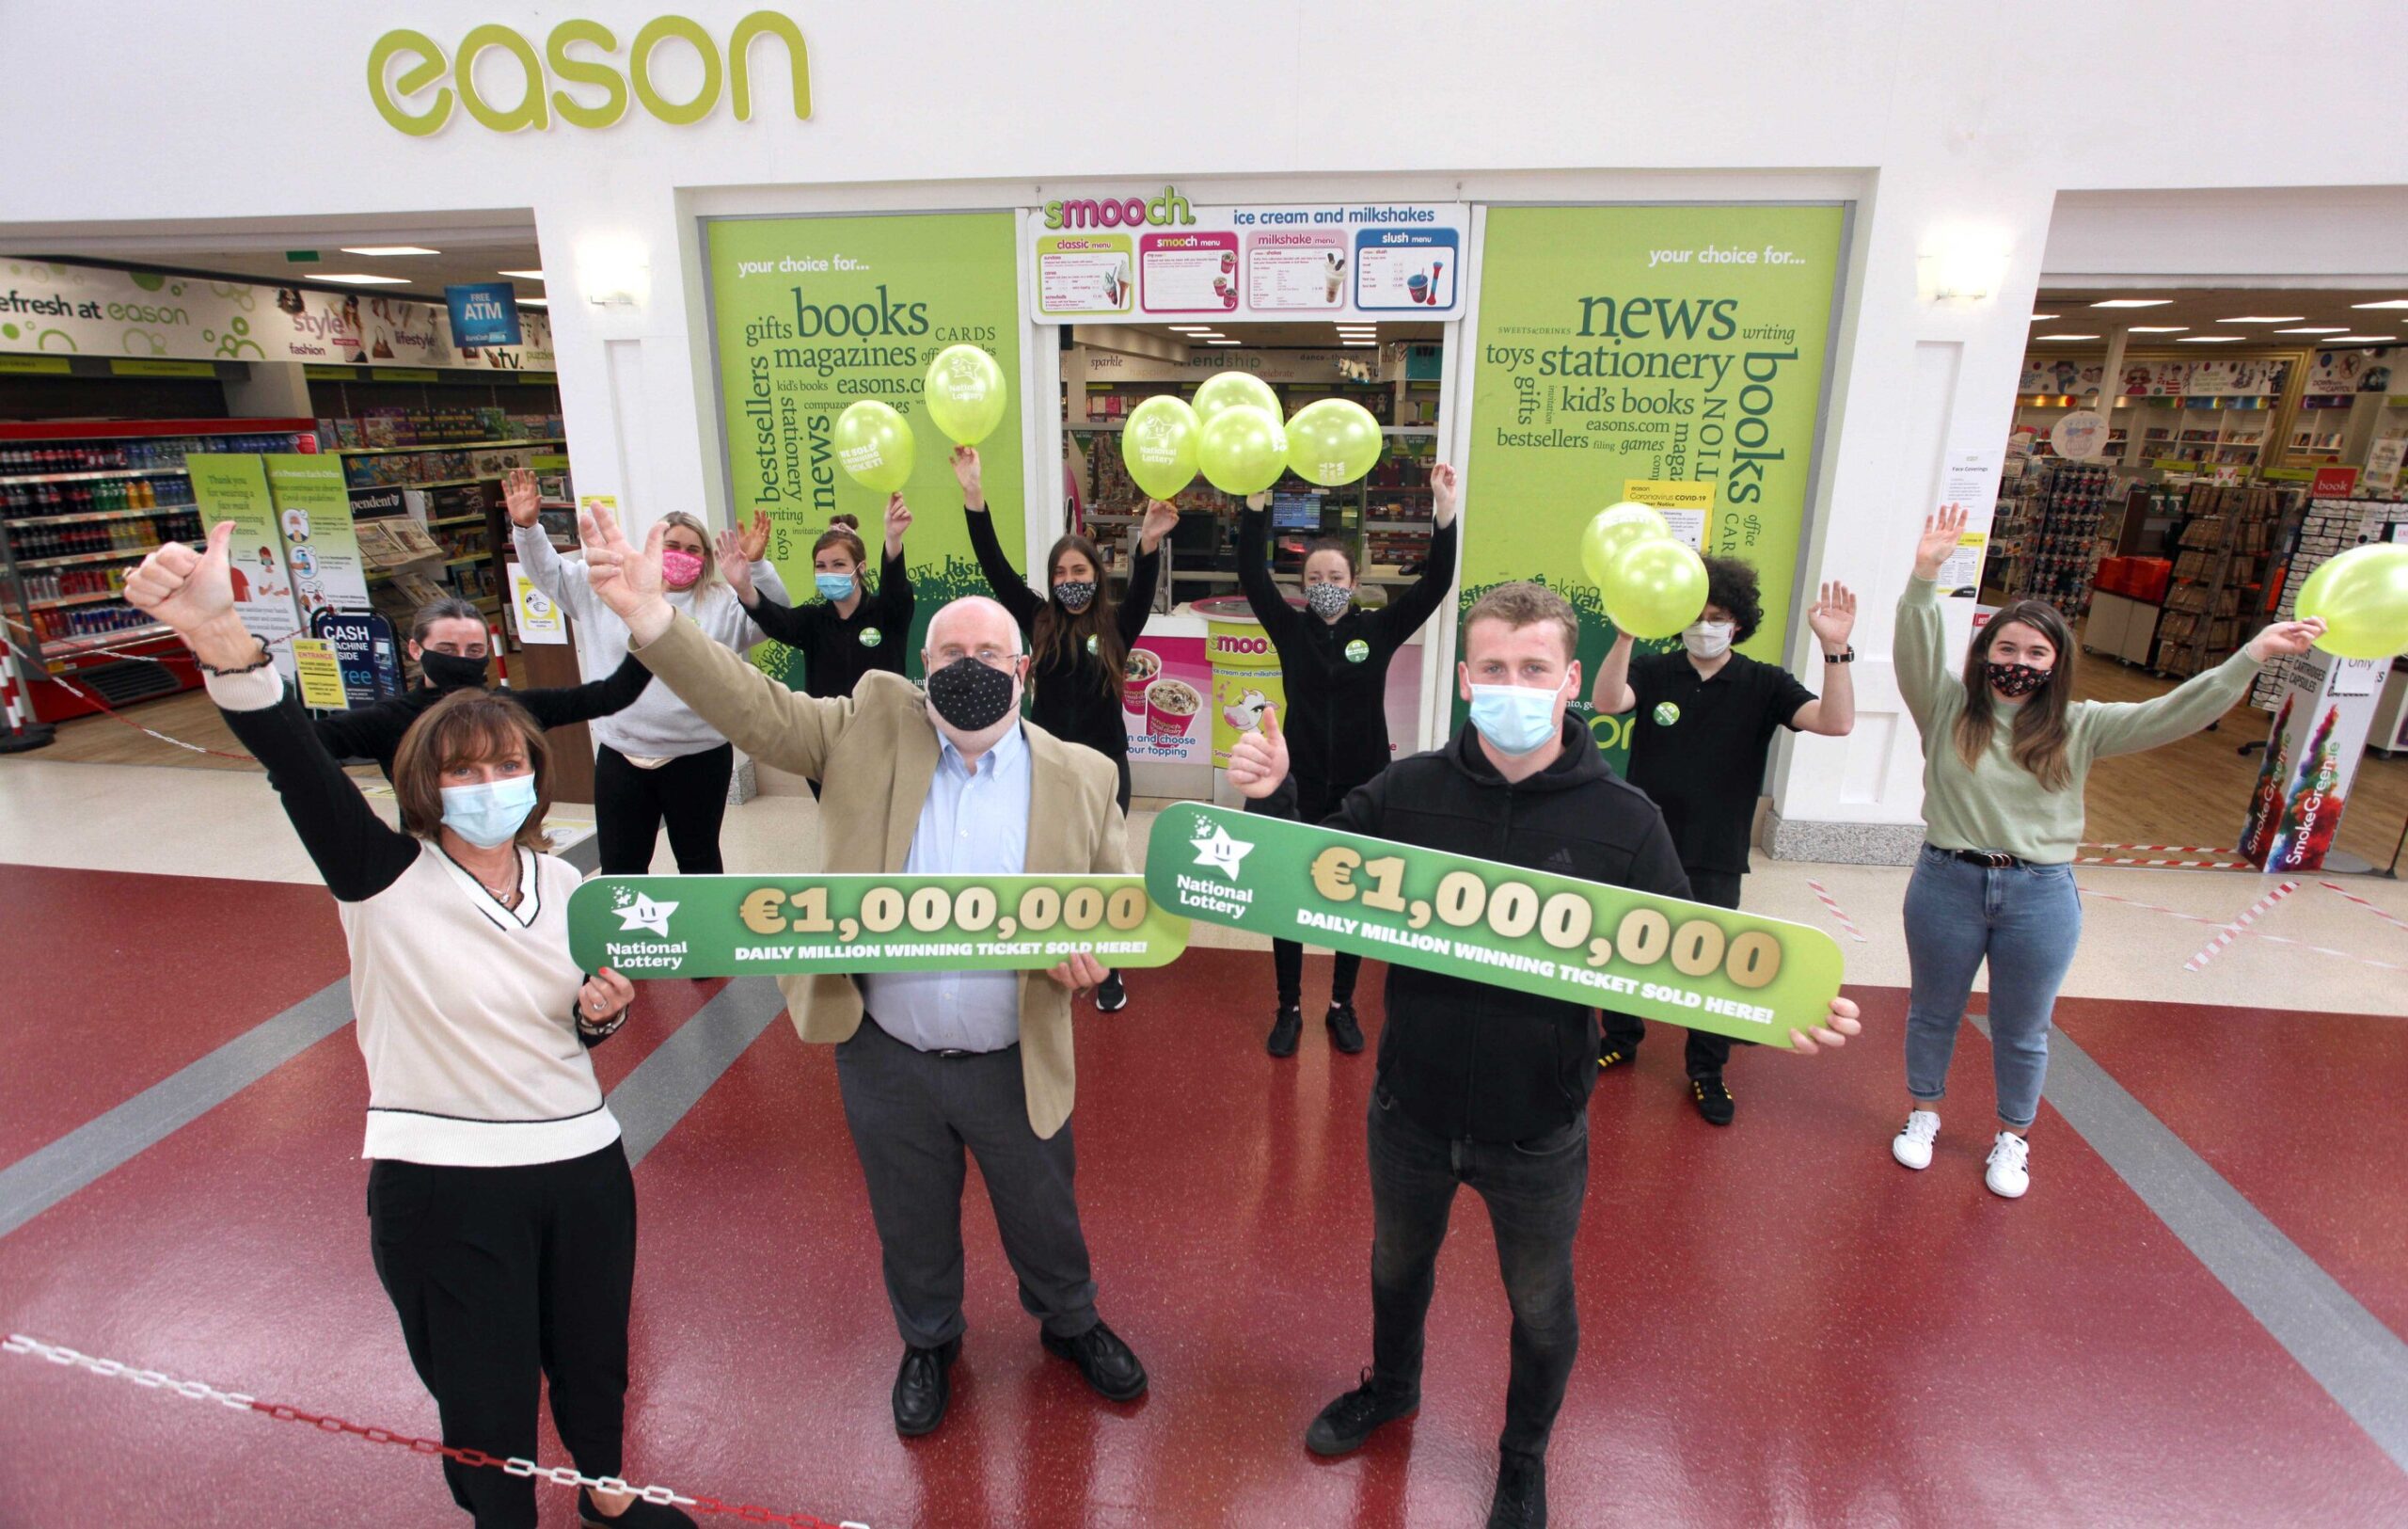 Eason Parkway Shopping Centre customer wins €1,000,000 on Daily Million game. Workers of Eason in Parkway Shopping Centre pictured above celebrating.